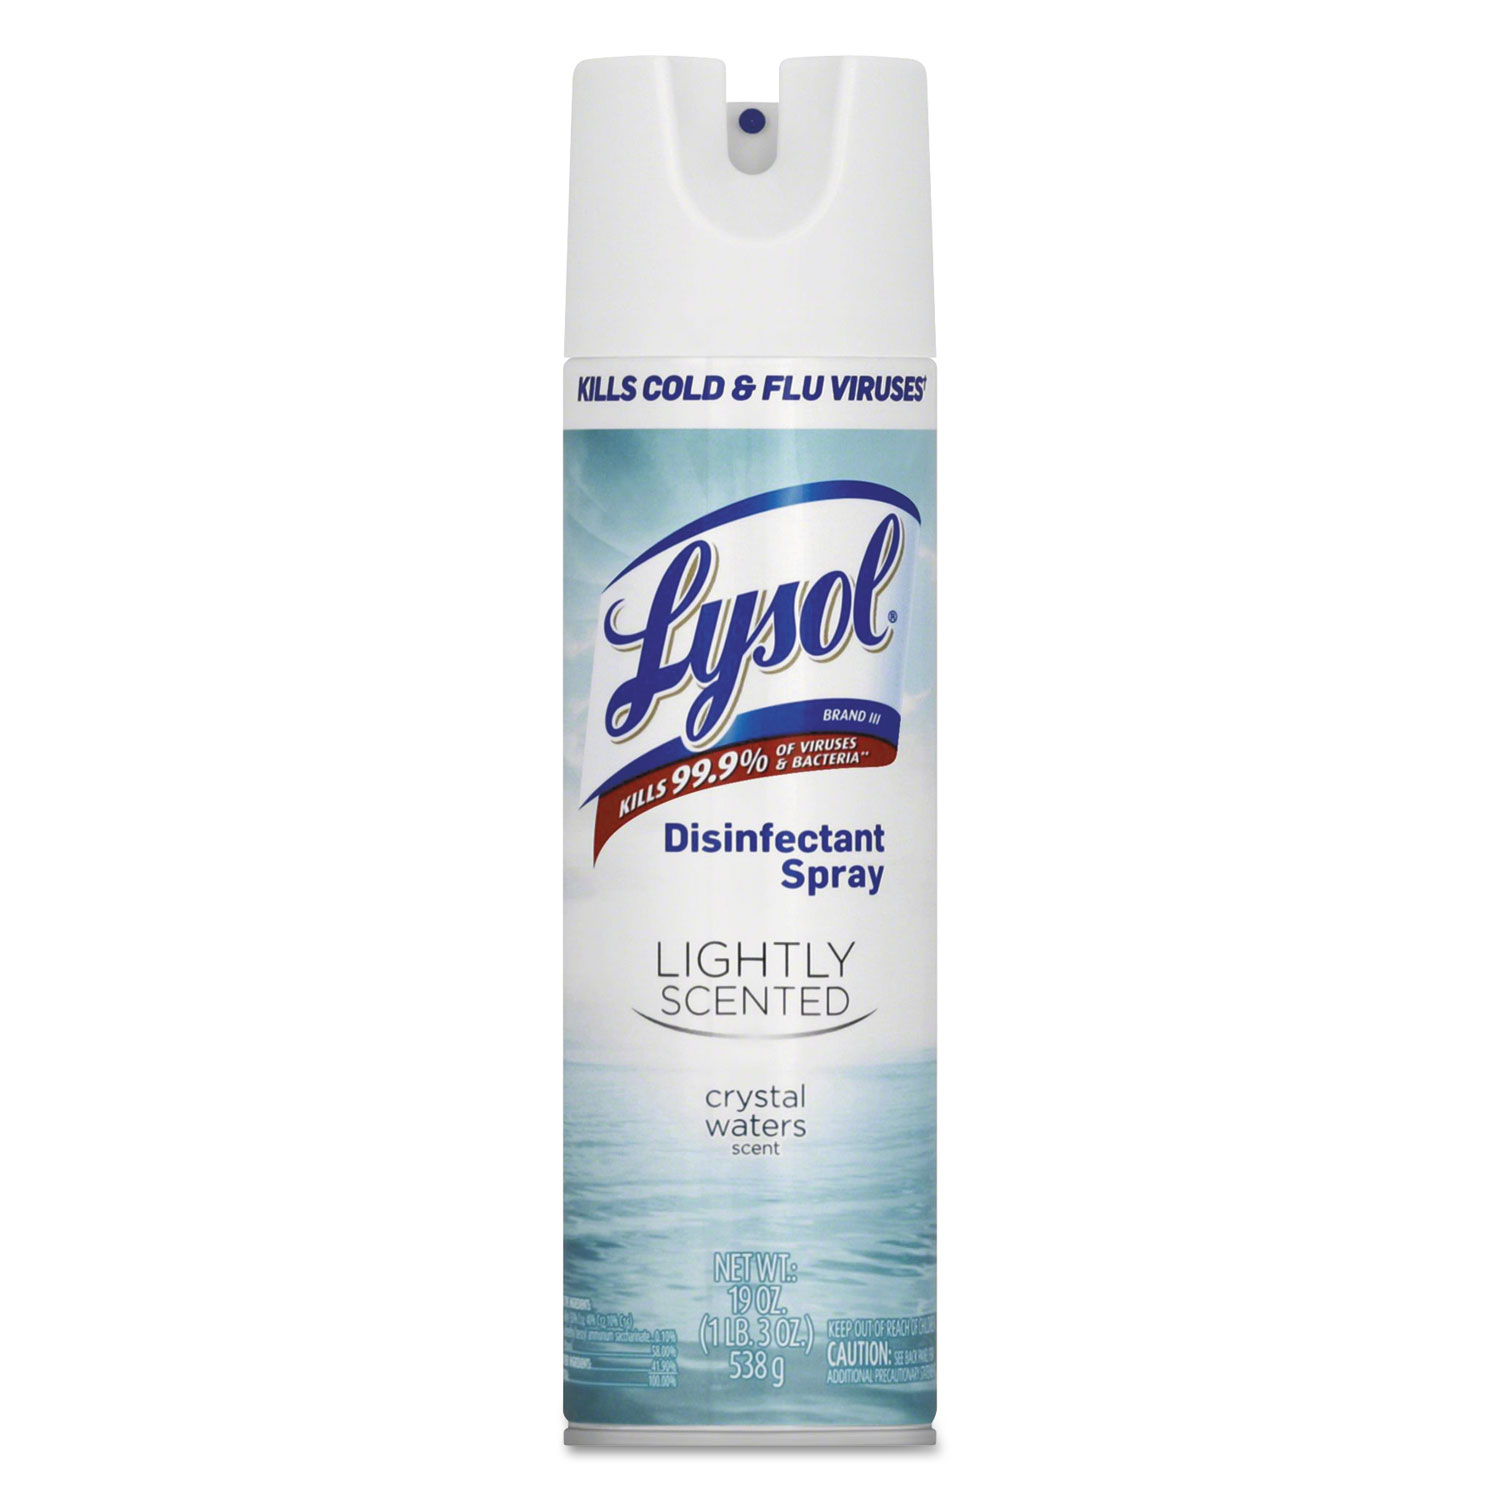 Lightly Scented Disinfectant Spray, Crystal Waters, 19 oz